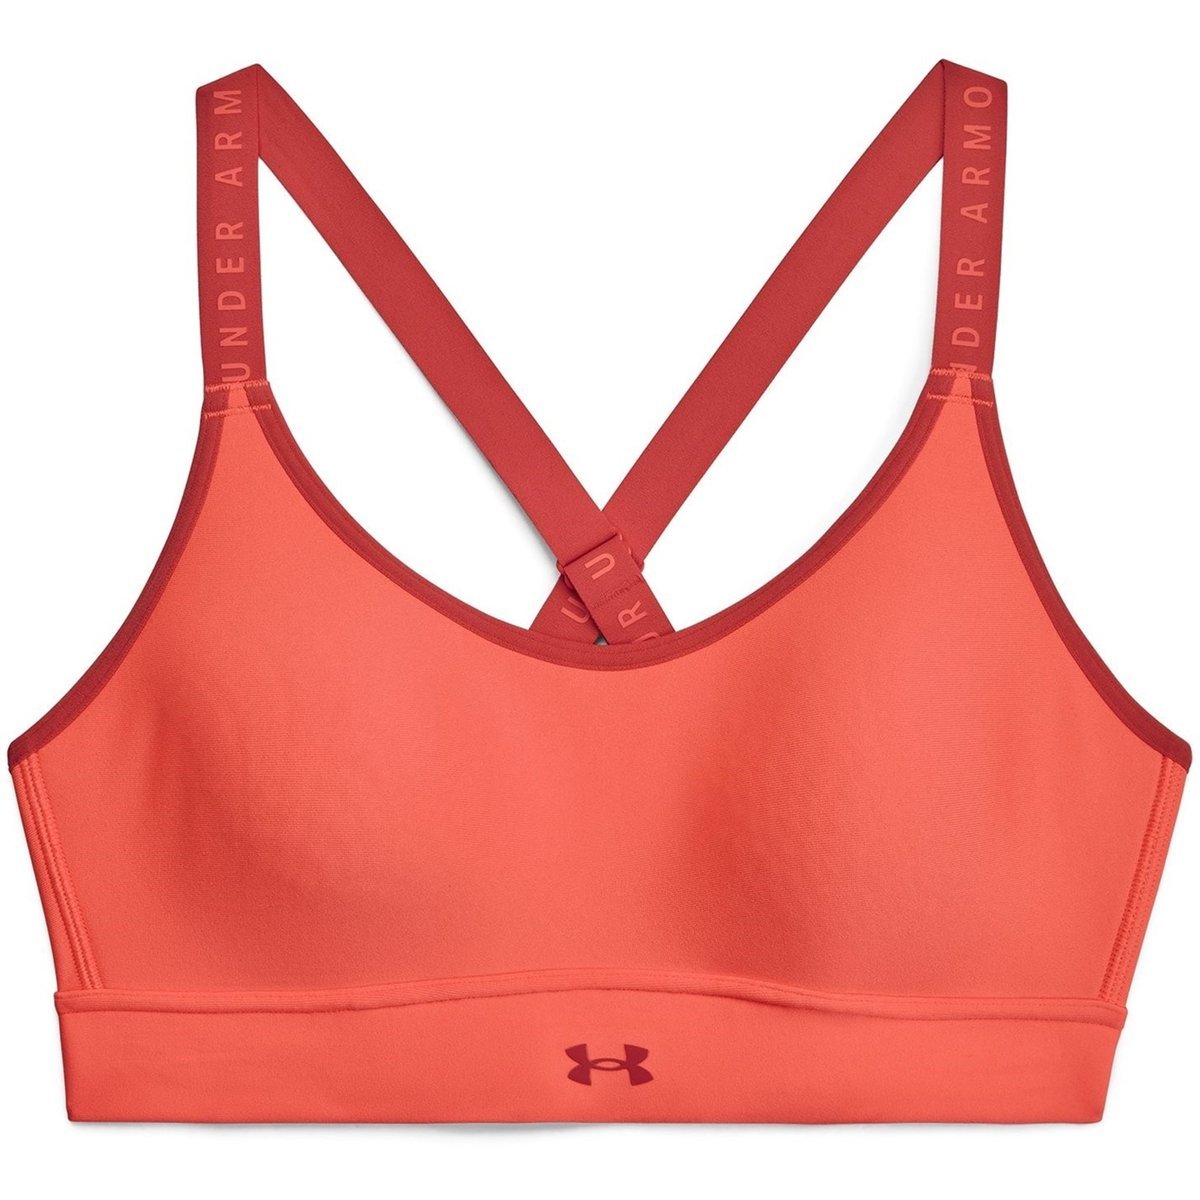 Under Armour Infinity Mid Sports Bra Prime Pink, €21.00